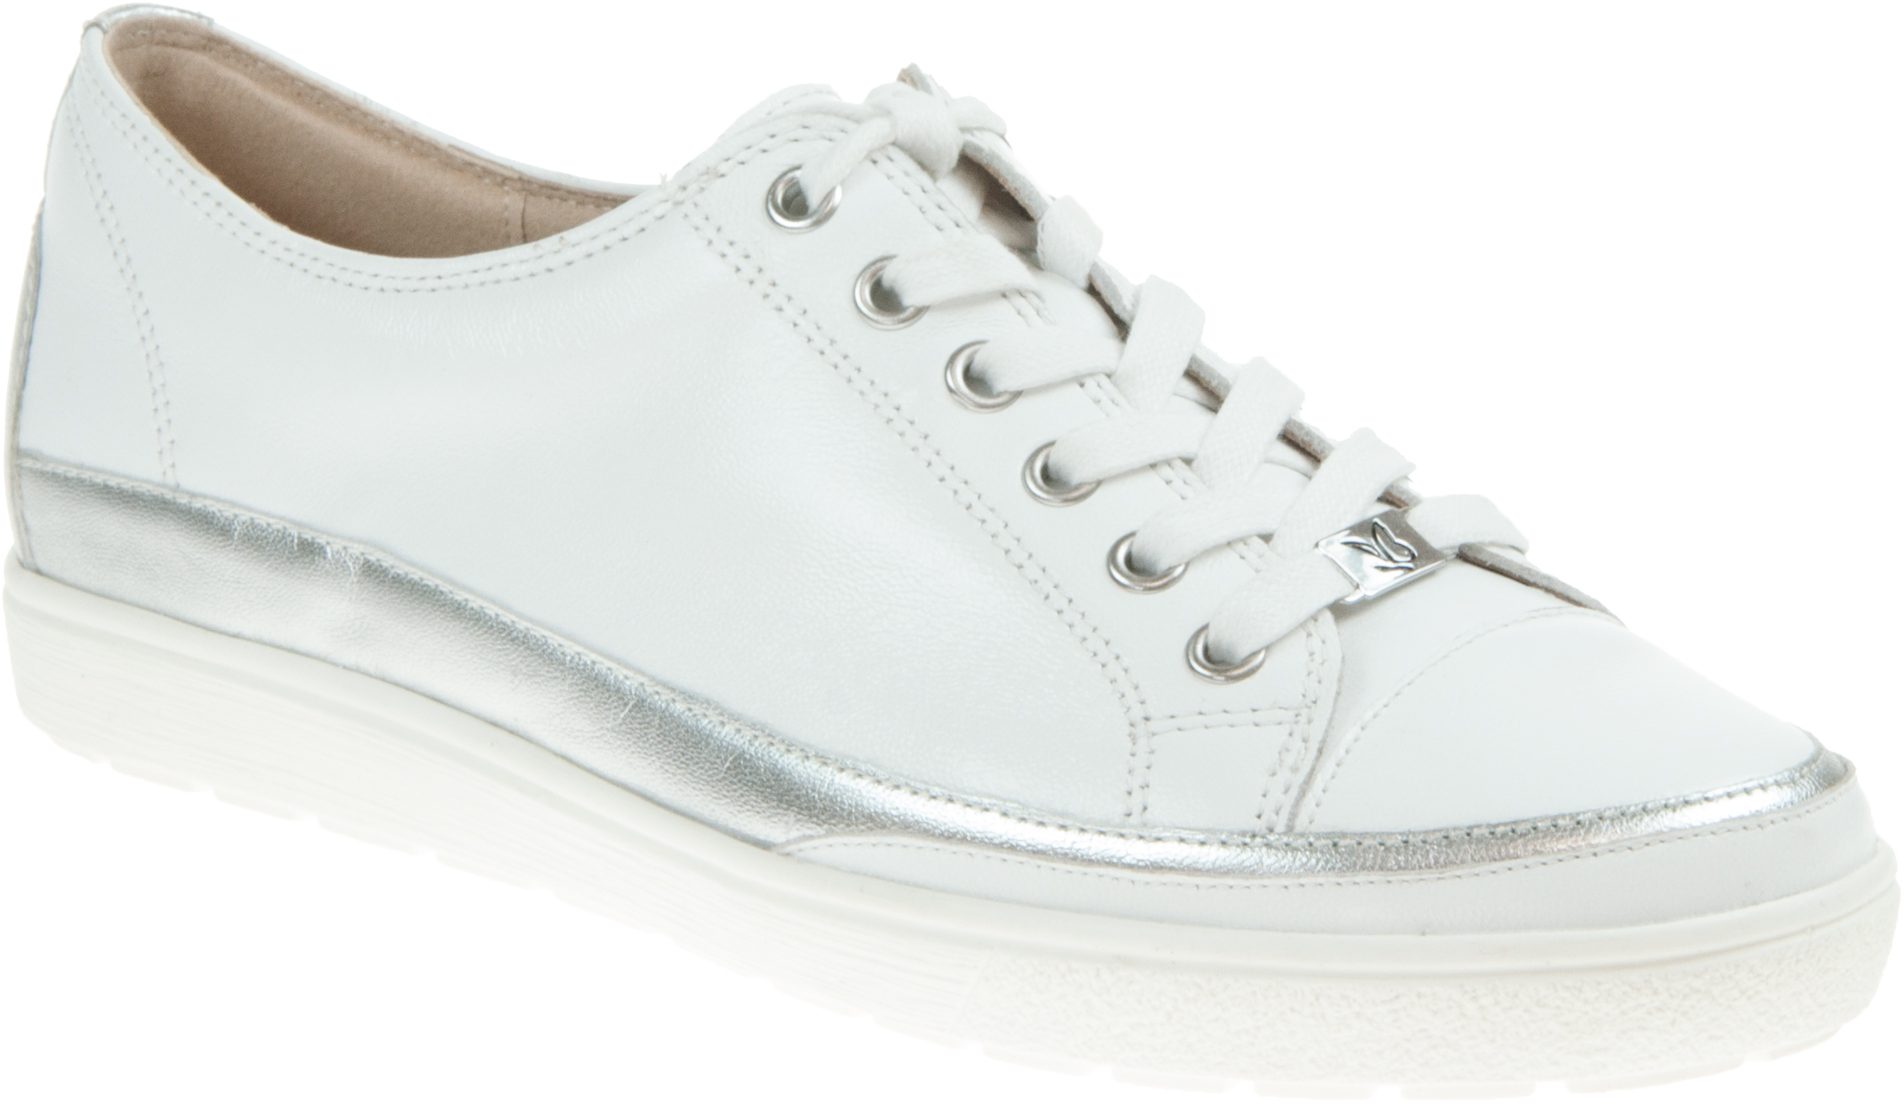 Caprice 23654-26 White Leather 23654-26 102 - Everyday Shoes ...